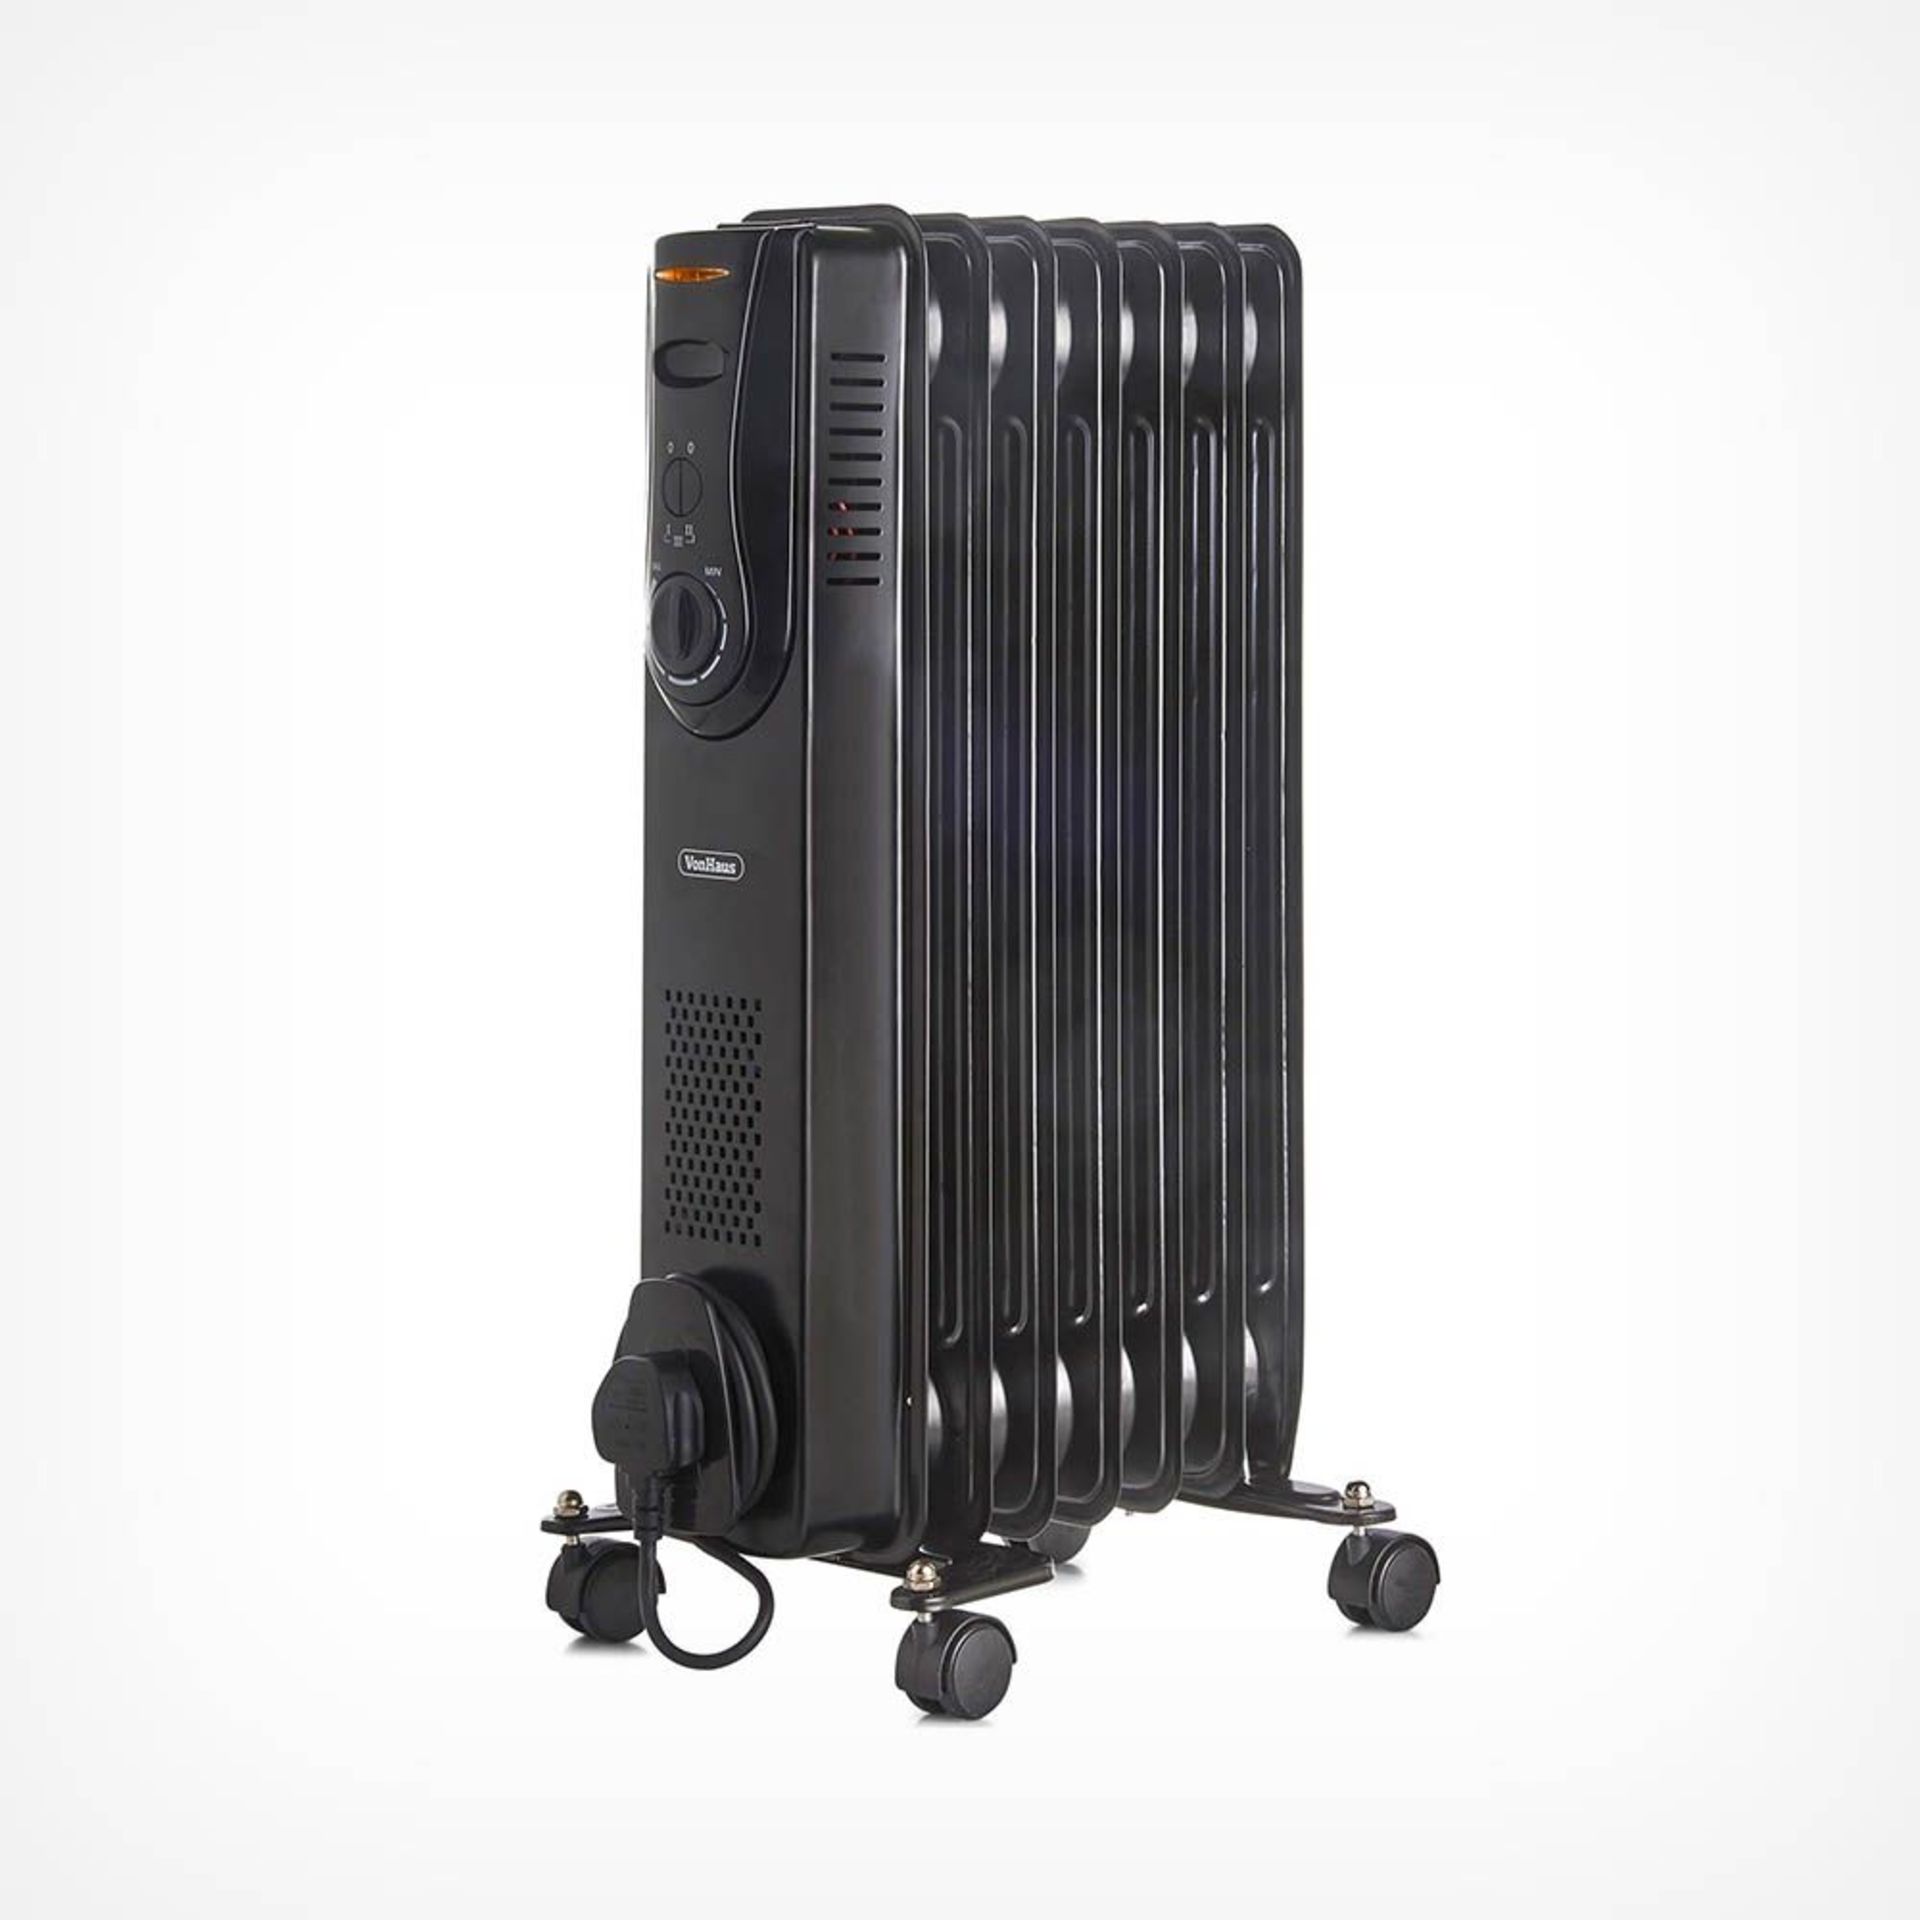 (H132) 7 Fin 1500W Oil Filled Radiator - Black Powerful 1500W radiator with 7 oil-filled fins ... - Image 2 of 4